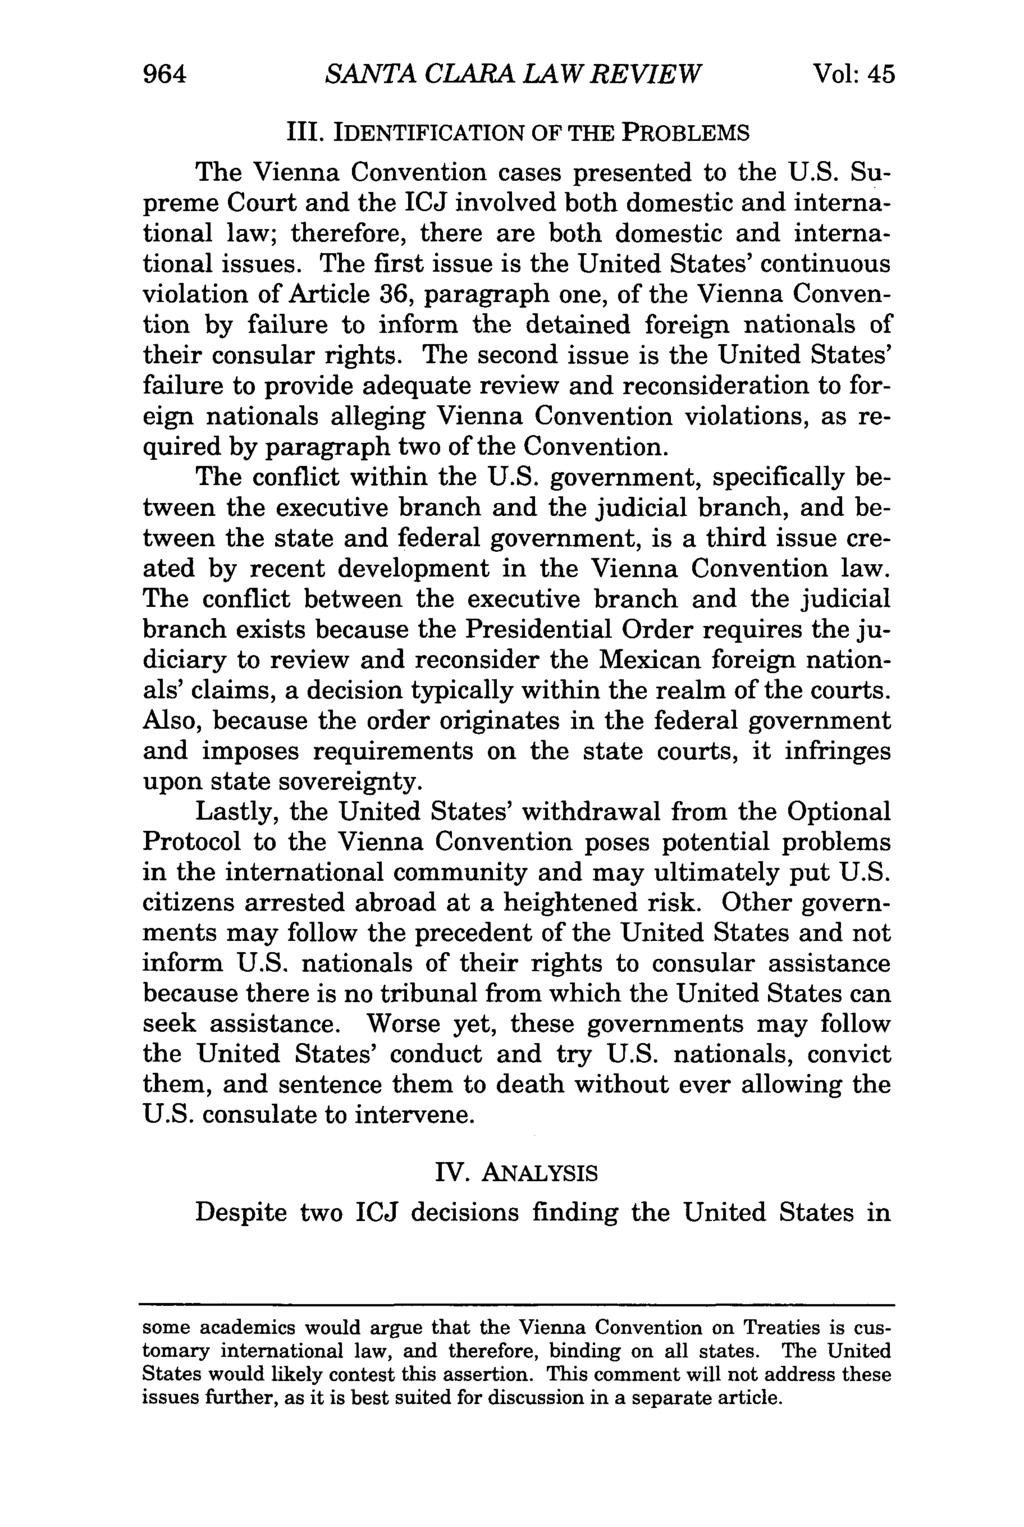 964 SANTA CLARA LAW REVIEW Vol: 45 III. IDENTIFICATION OF THE PROBLEMS The Vienna Convention cases presented to the U.S. Supreme Court and the ICJ involved both domestic and international law; therefore, there are both domestic and international issues.